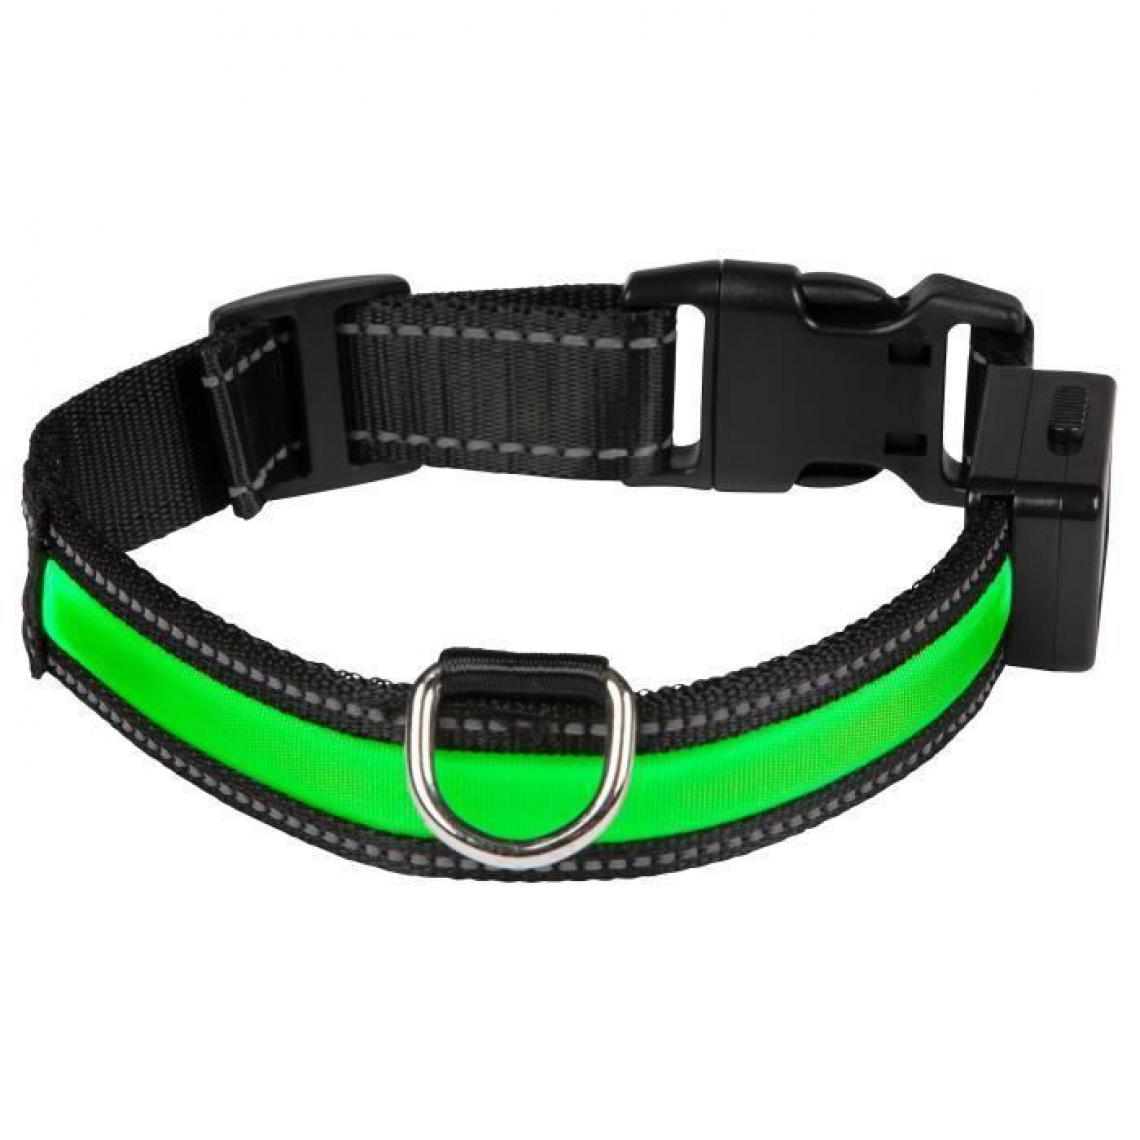 Eyenimal - EYENIMAL Collier lumineux Light Collar USB rechargeable S - Vert - Pour chien - Collier pour chien